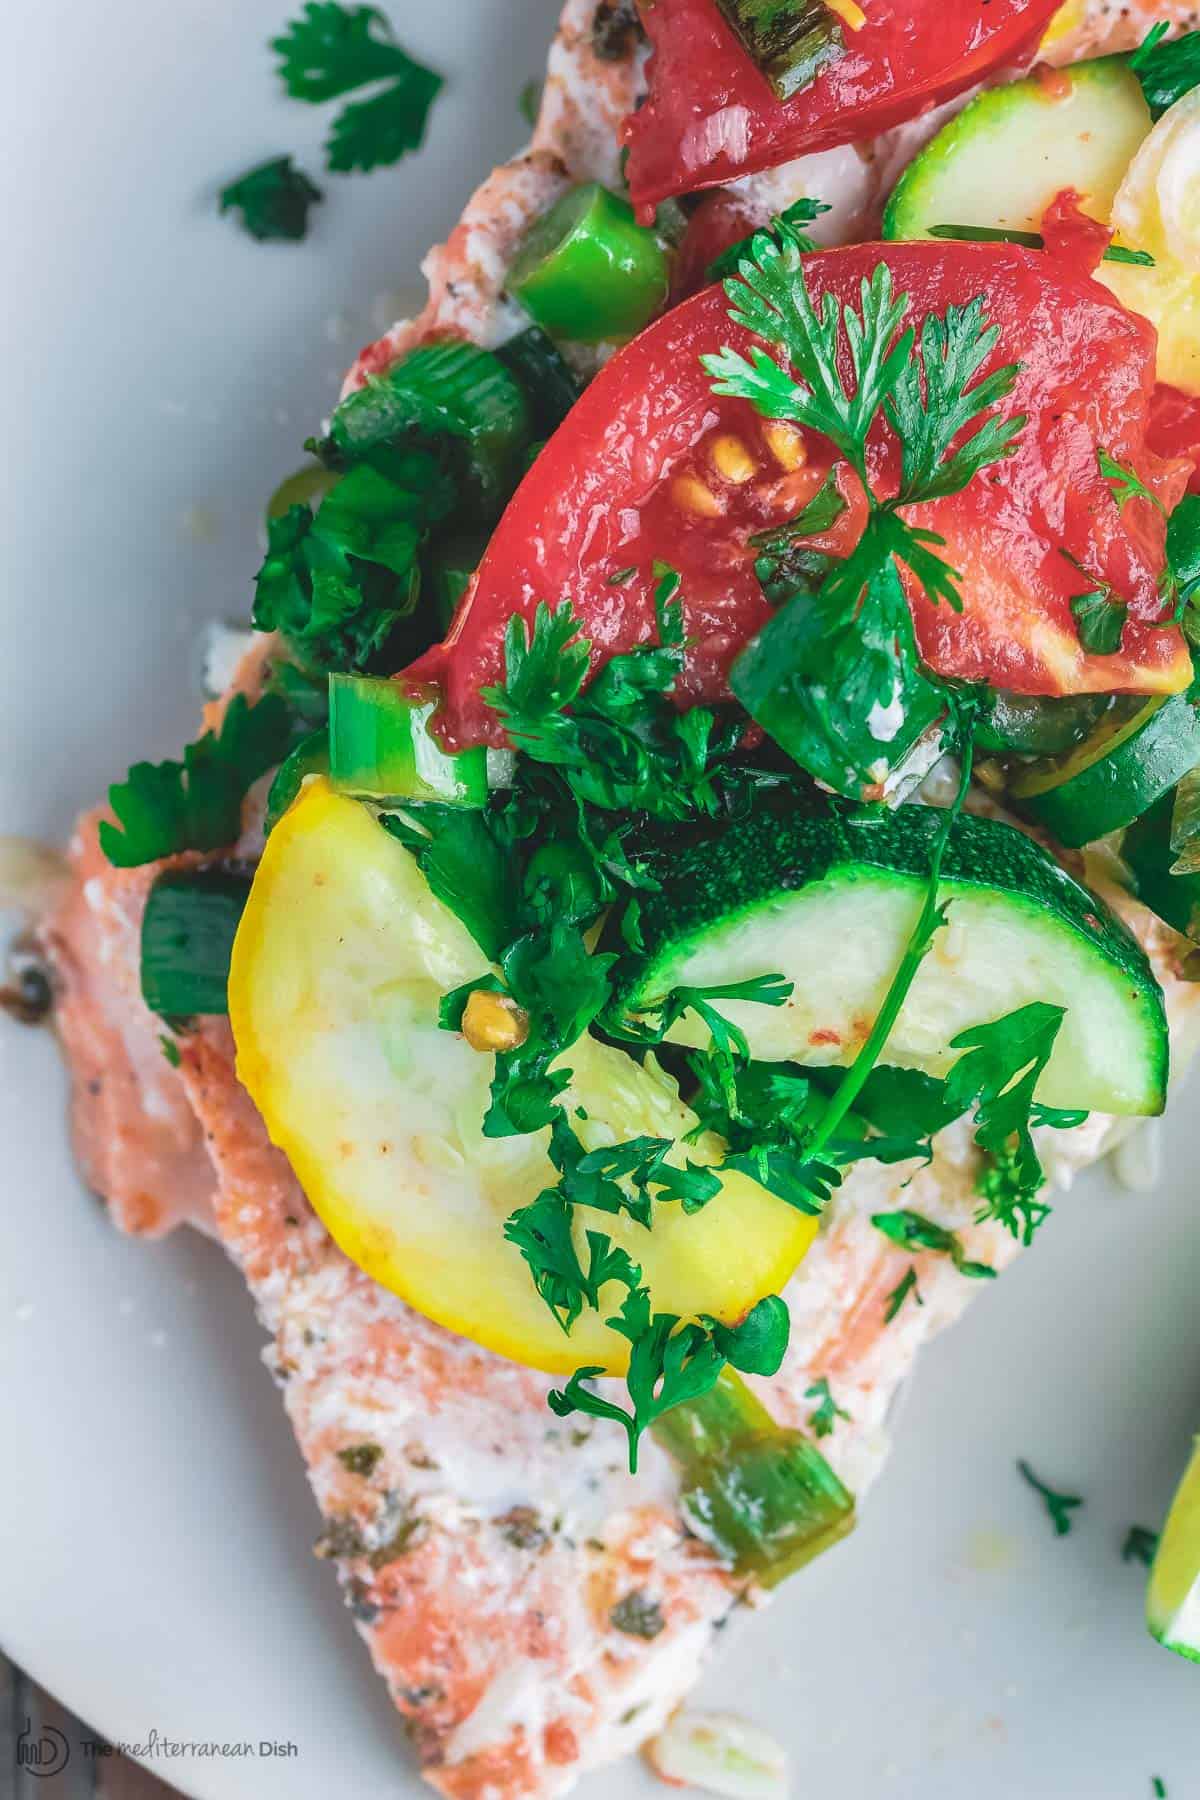 Mediterranean-style Oven Baked Salmon in Foil | The Mediterranean Dish. Salmon with garlic and thyme, topped with vegetables and a buttery-lime sauce and baked in foil to perfection! Bakes in less than 25 mins! Try this easy dinner soon.